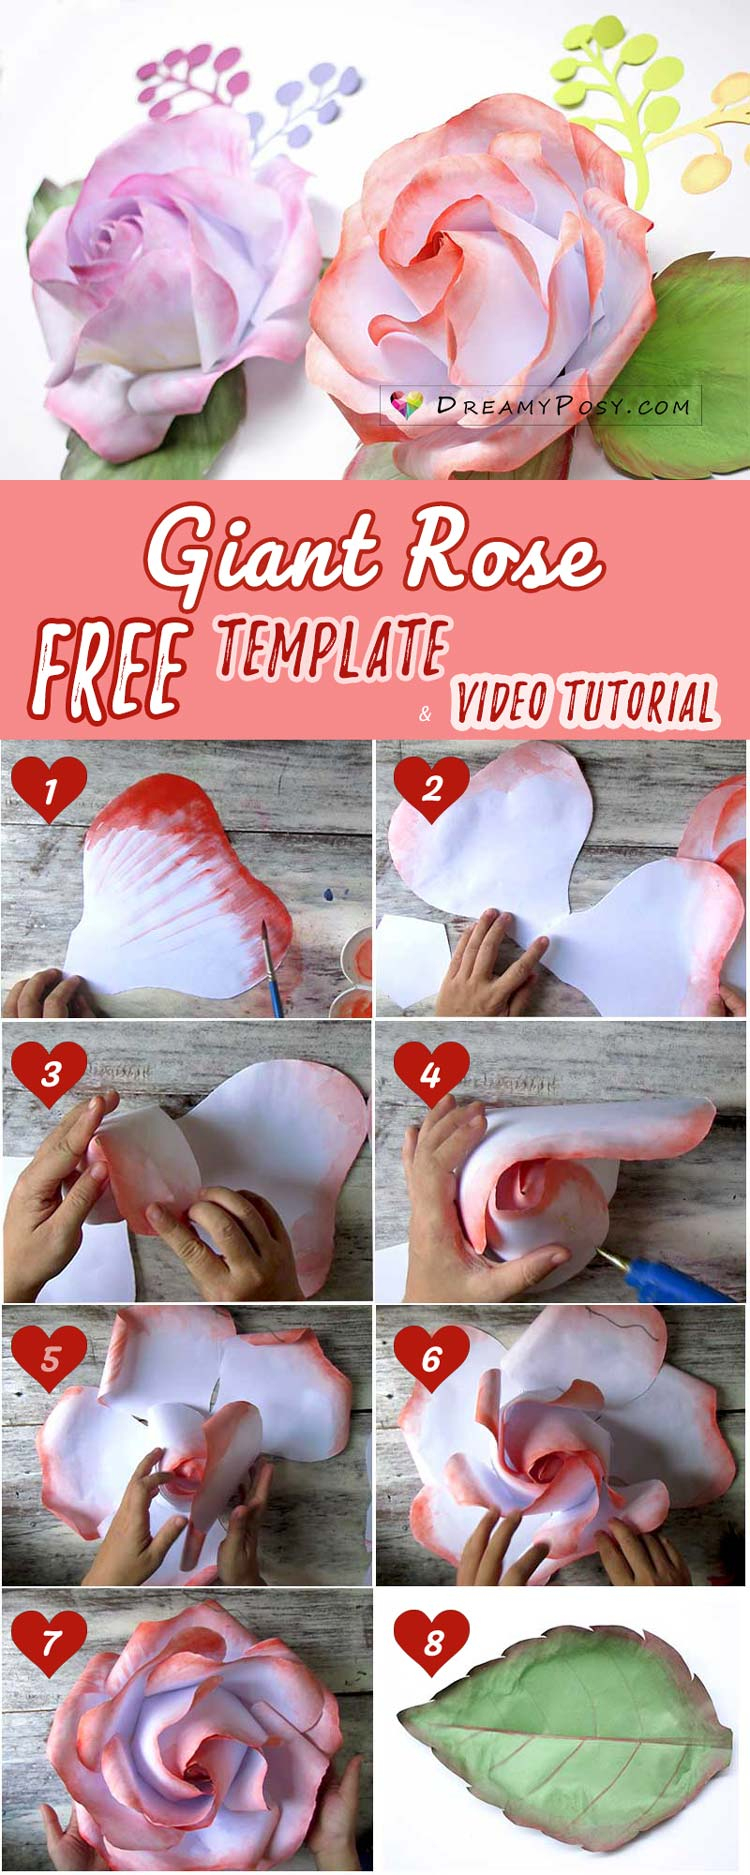 Free Template And Full Tutorial To Make Giant Rose For Backdrop - Free Printable Large Paper Rose Template